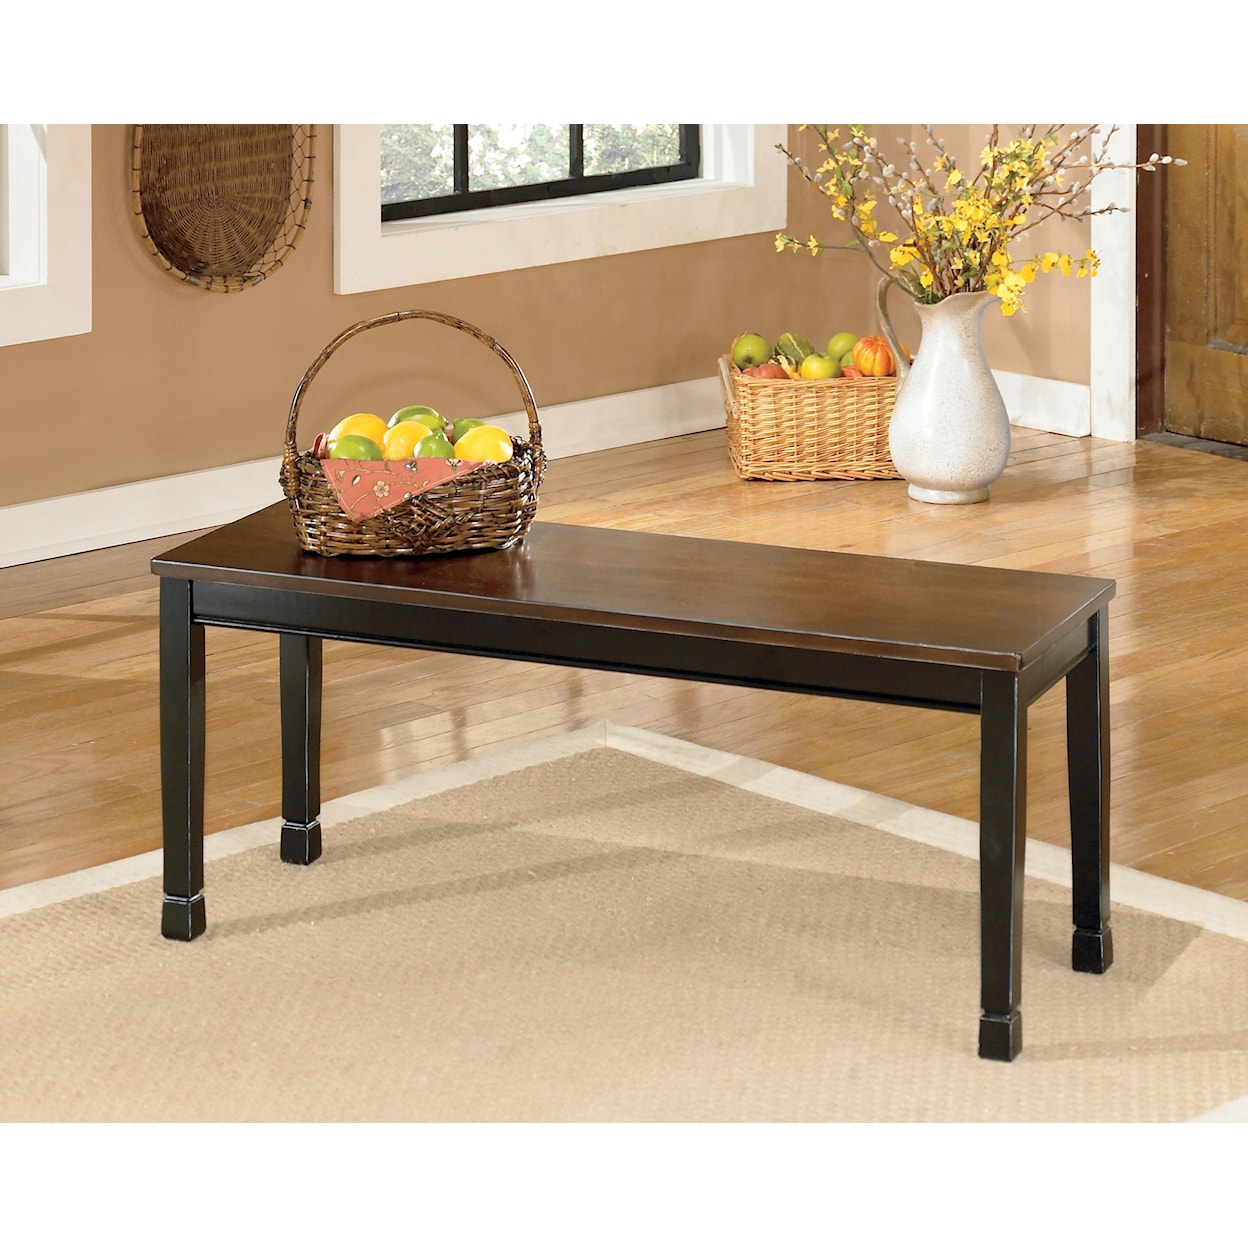 Signature Design by Ashley Furniture Owingsville 6-Piece Rectangular Table Set with Bench